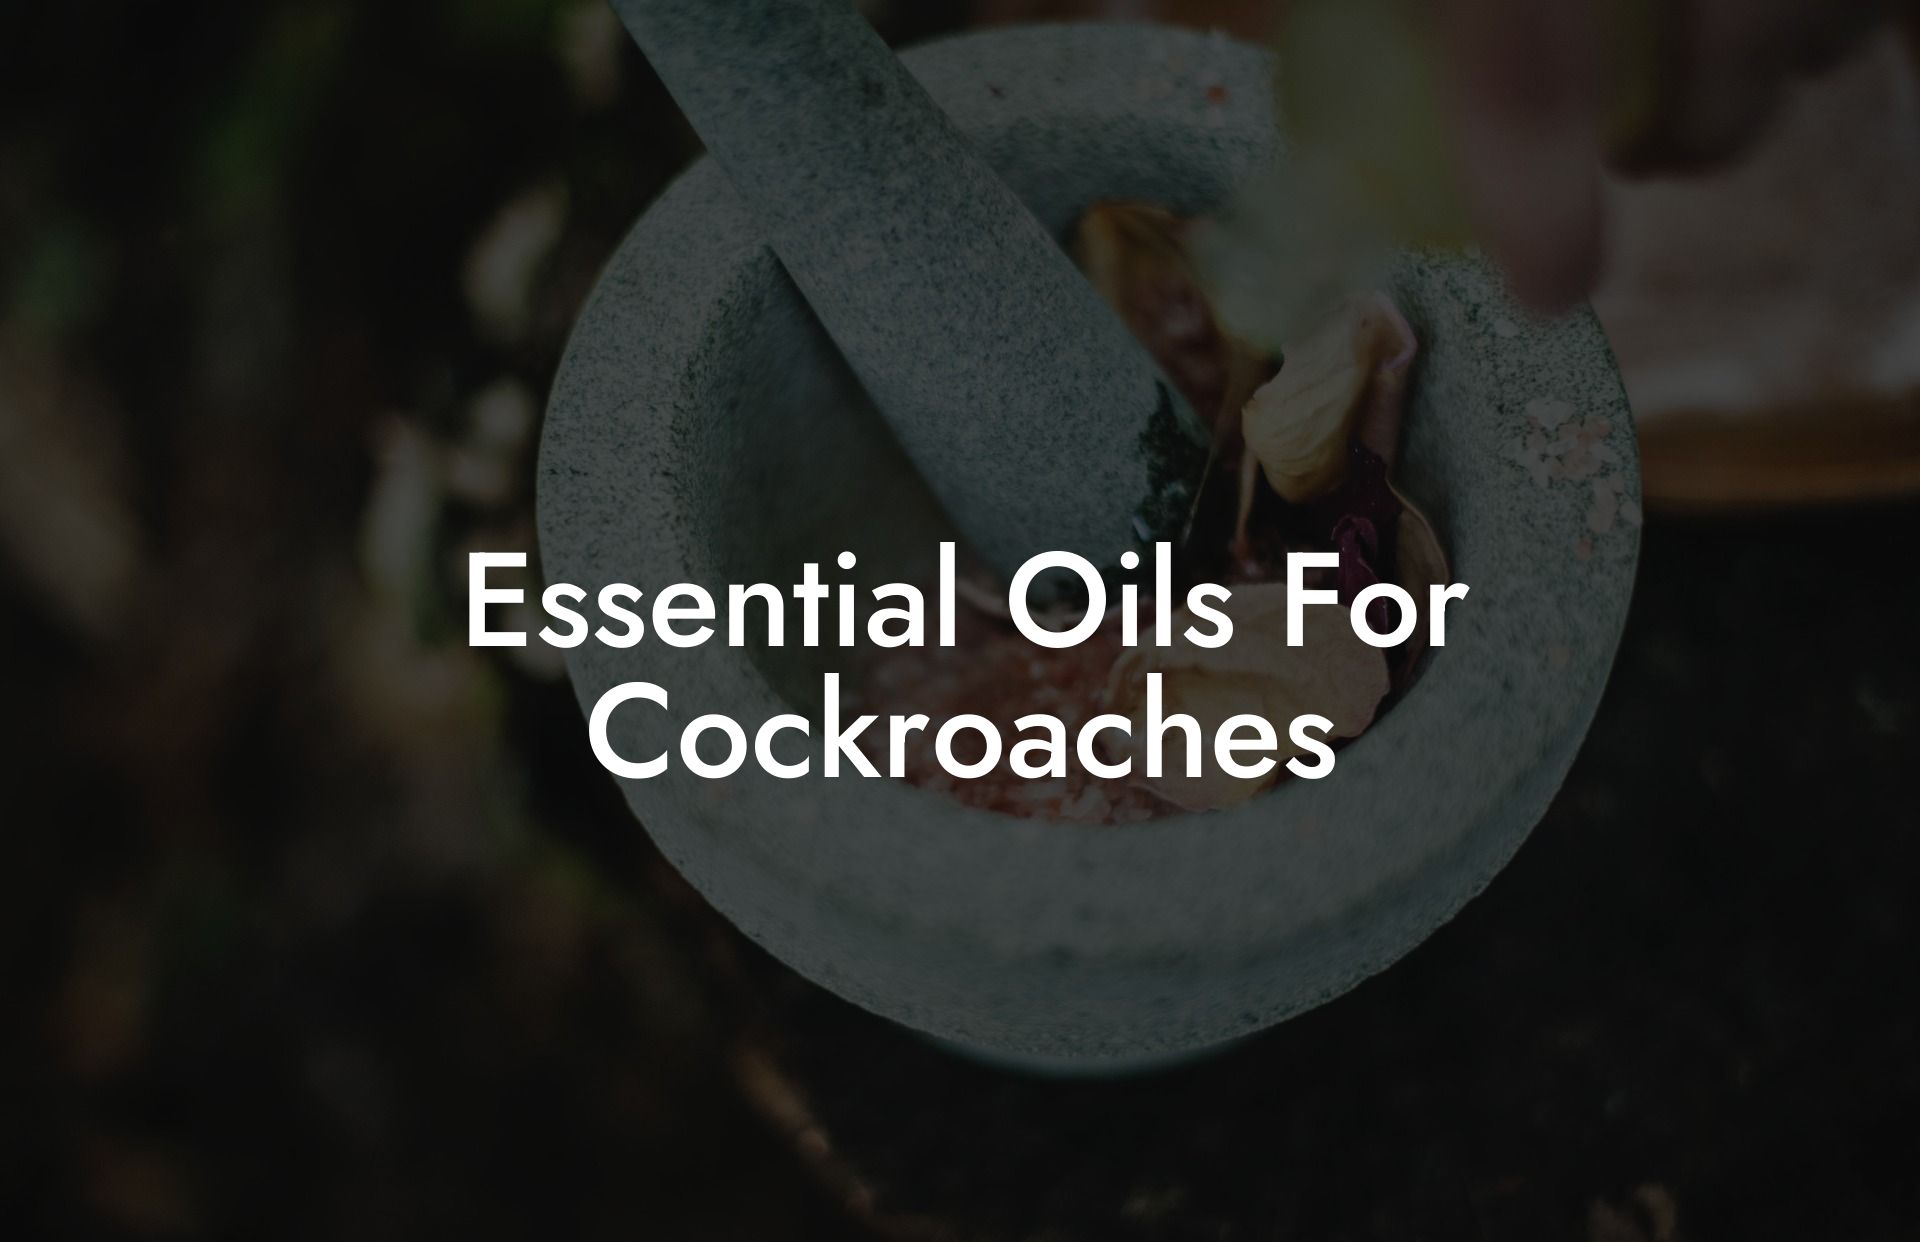 Essential Oils For Cockroaches